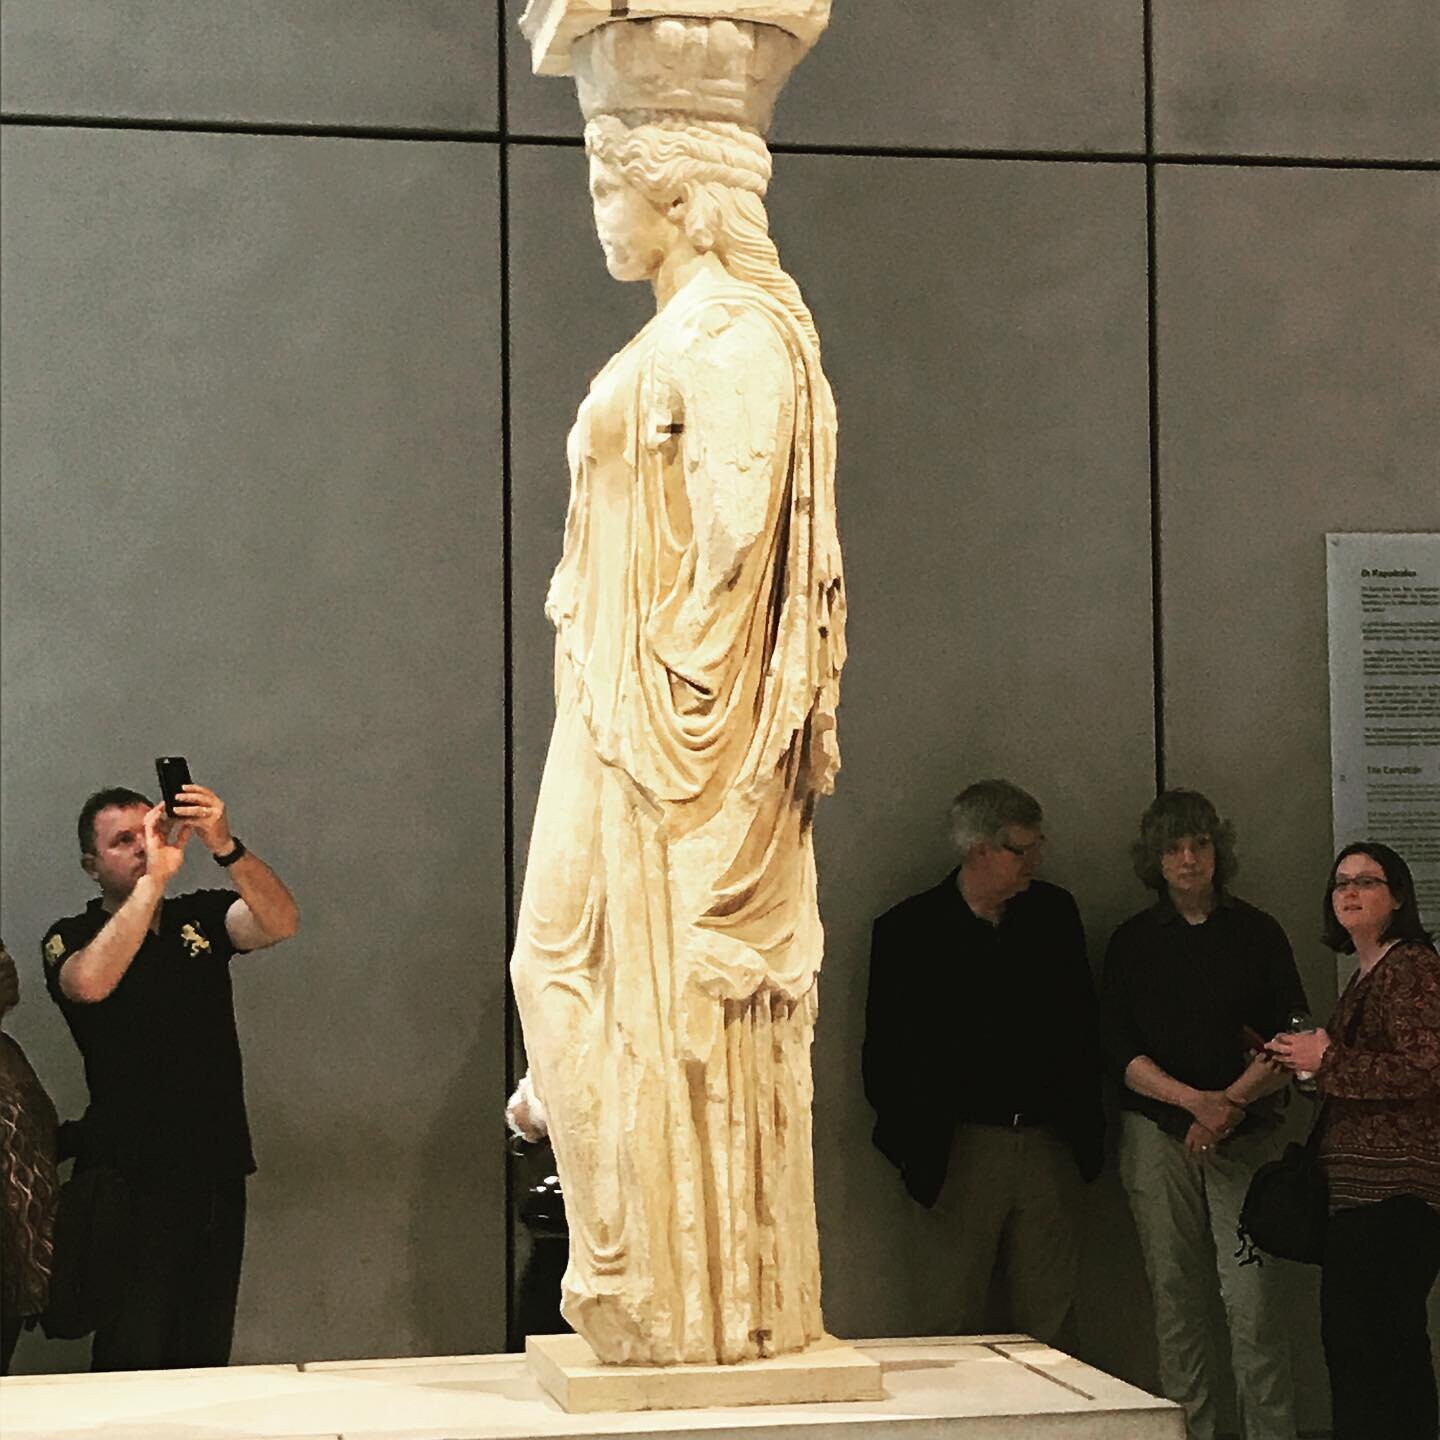 Celebrating women and the weight we have always carried with strength, fortitude, grace - on International Women&rsquo;s Day. She is shown alone, in a museum, but the real story is how she shared the load for over 2,000 years with her sisters, the Ca